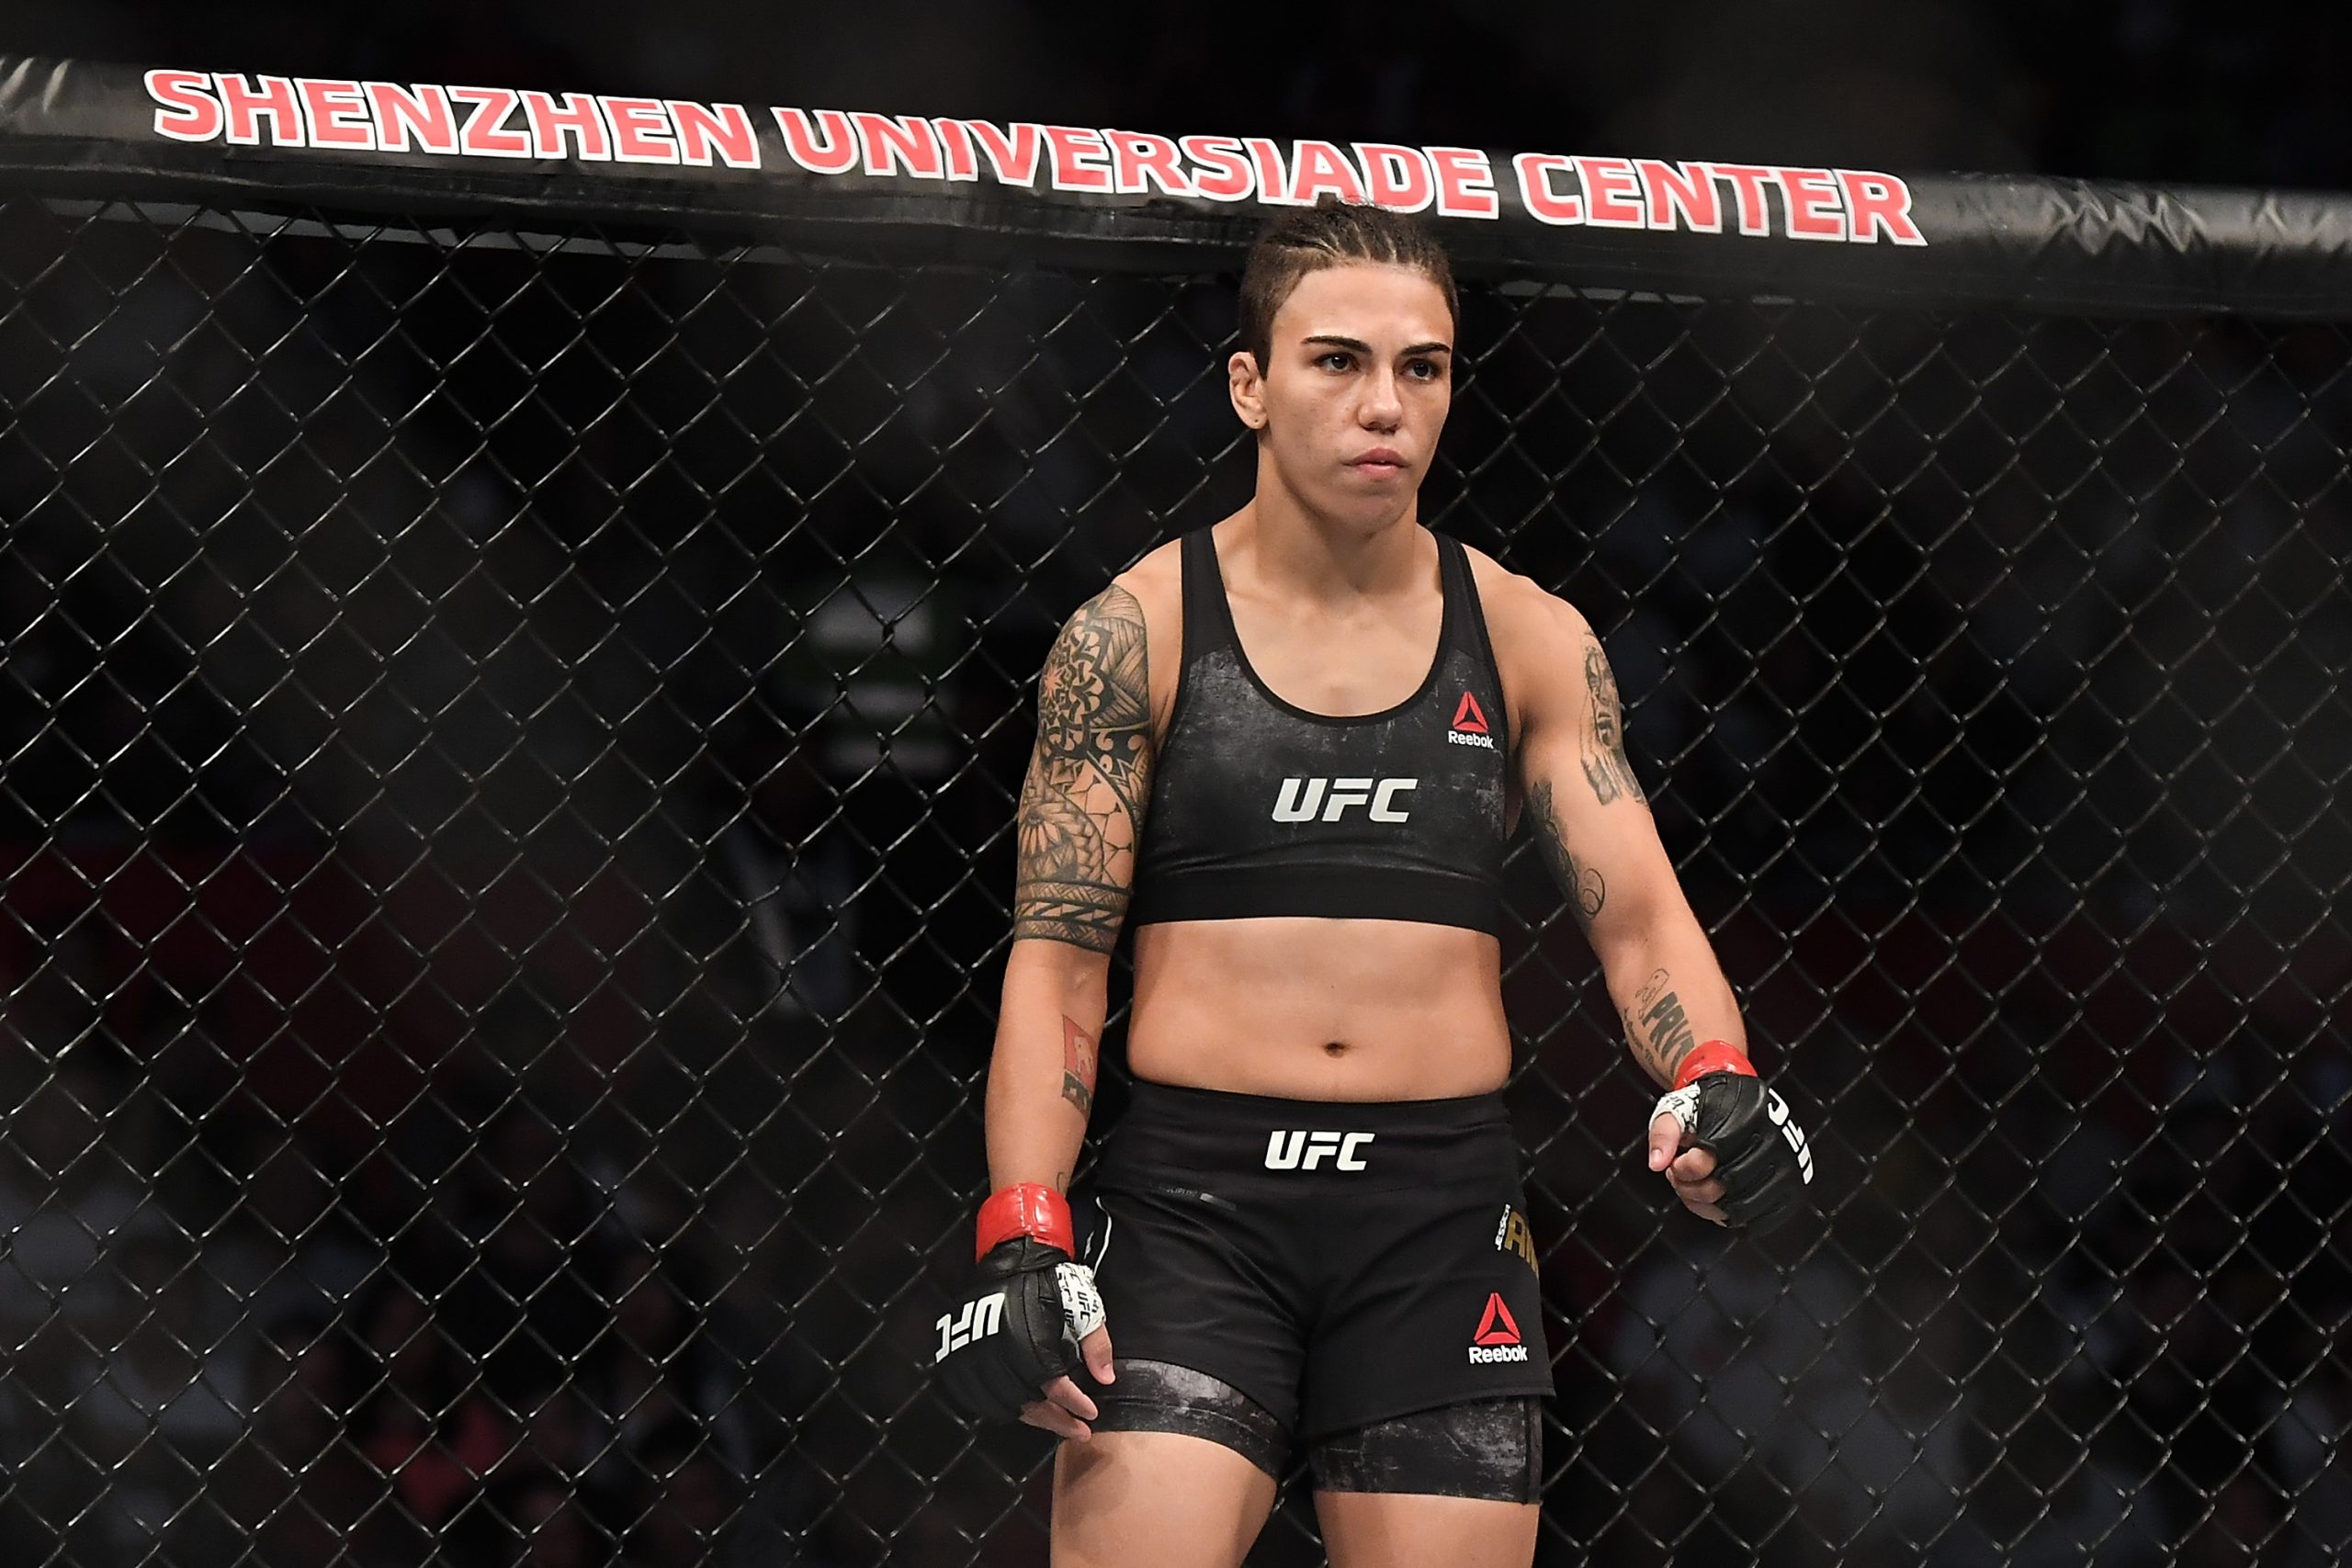 Jessica andrade onlyfans link